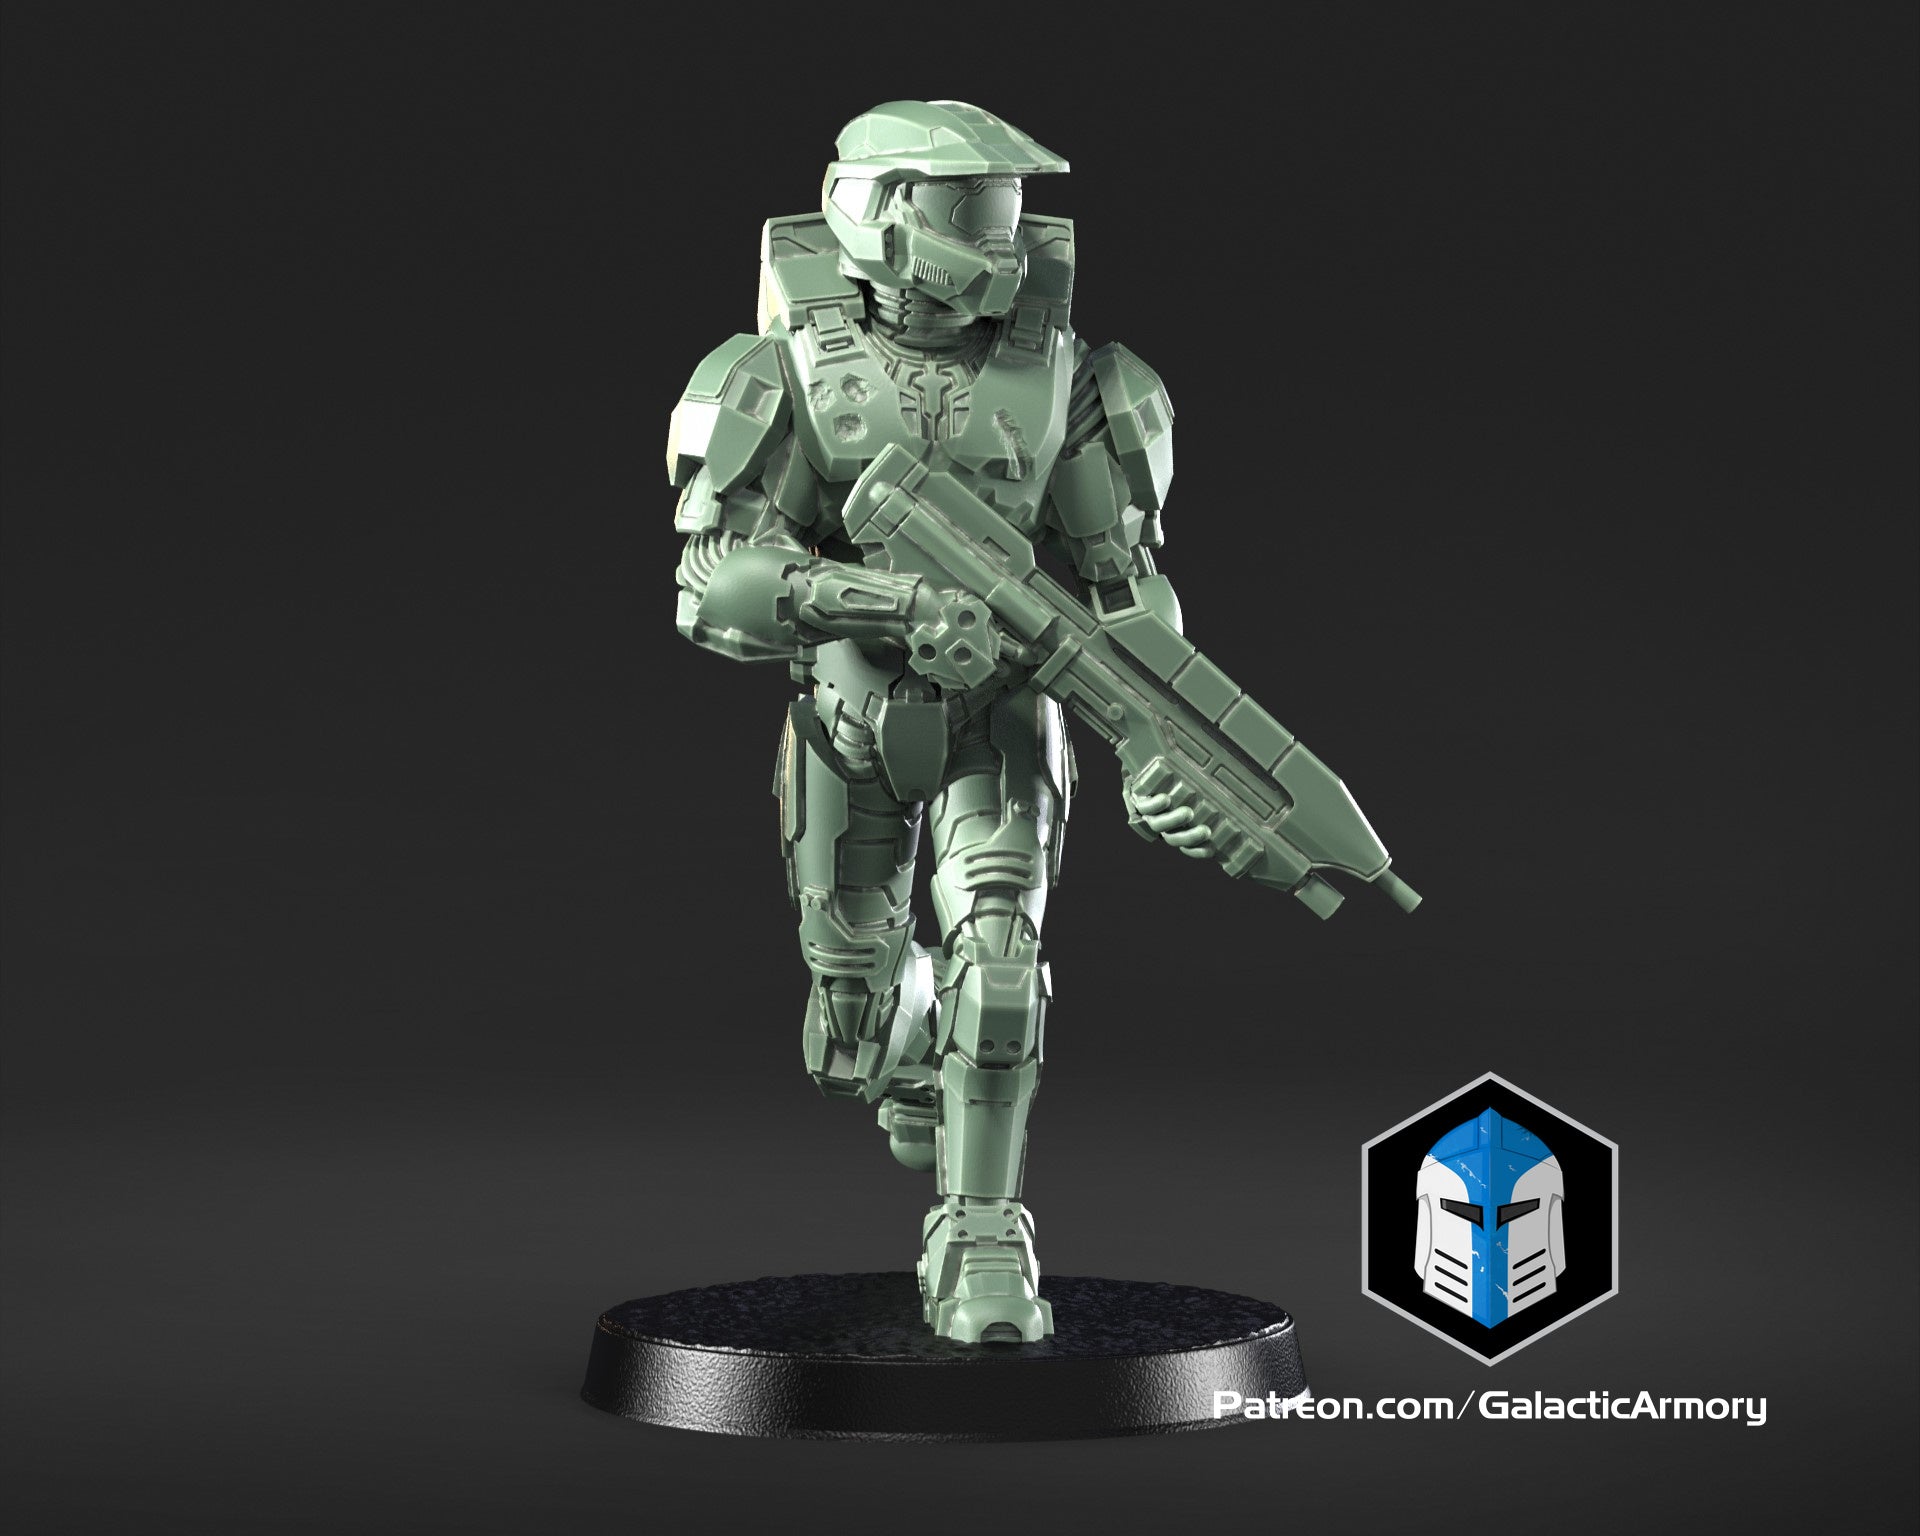 1:48 Scale Halo 3 Master Chief Miniatures - 3D Print Files